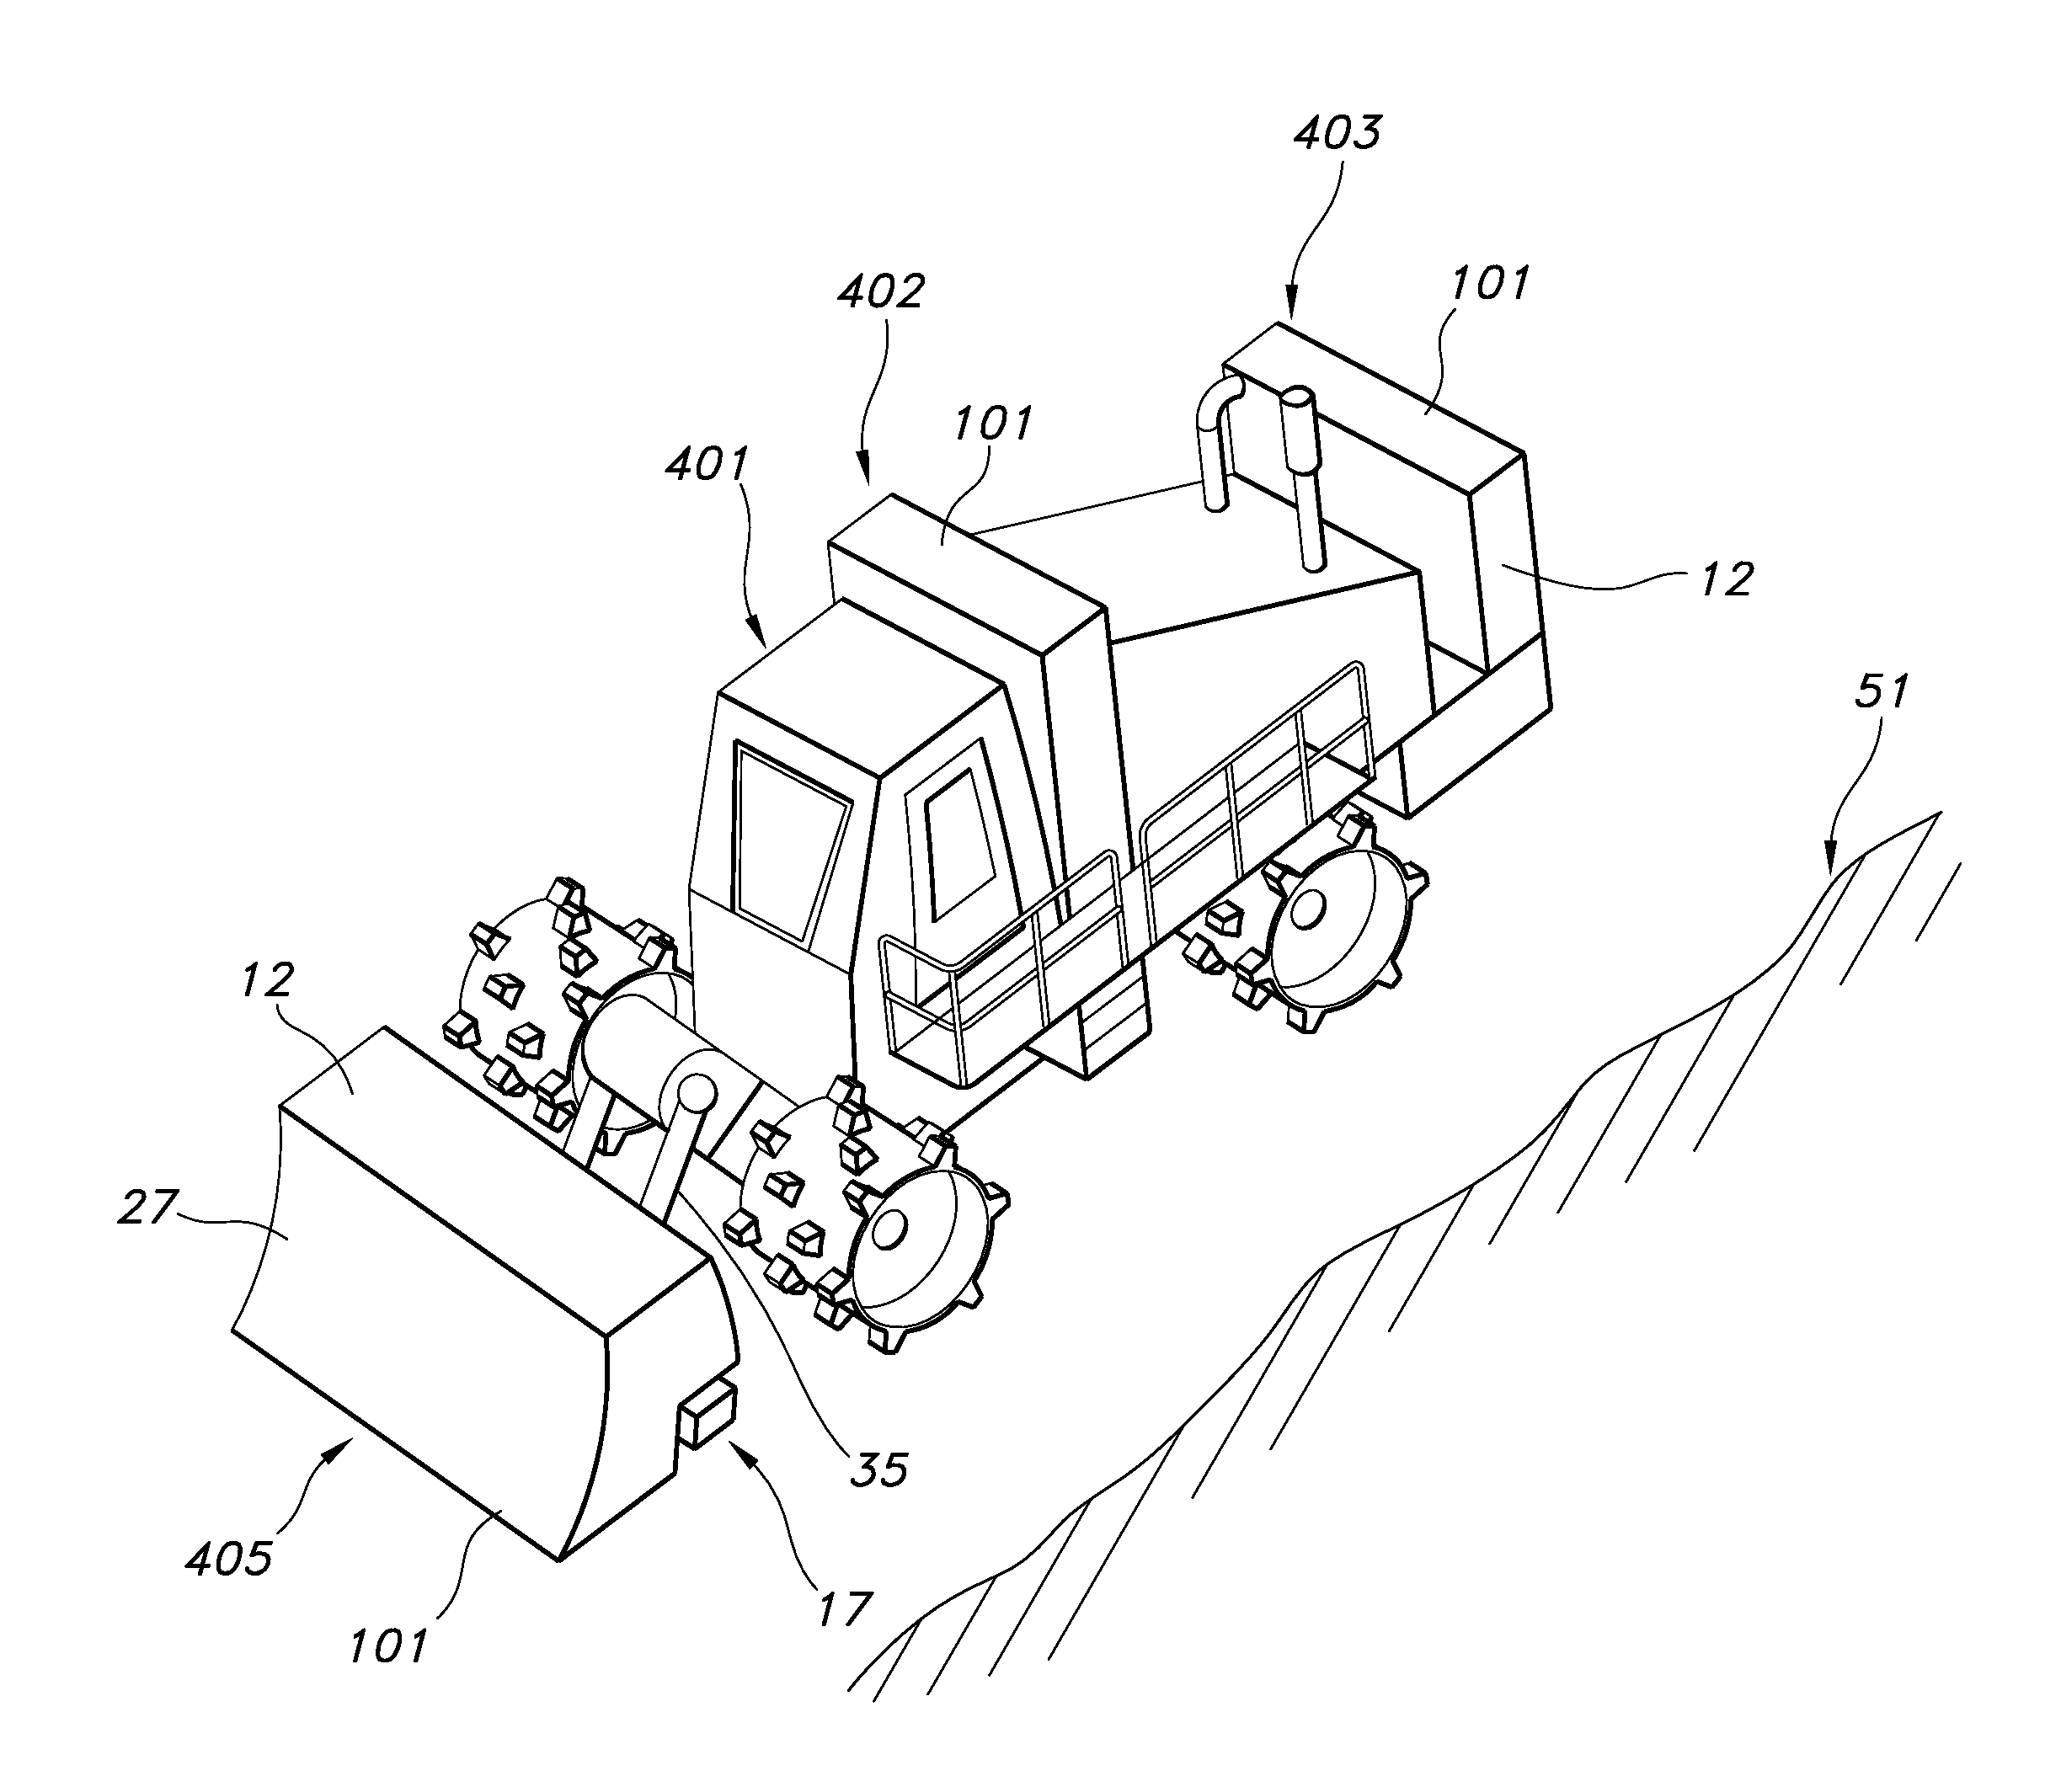 Apparatus and Method to Apply Liquid to Solid Waste Disposal Site